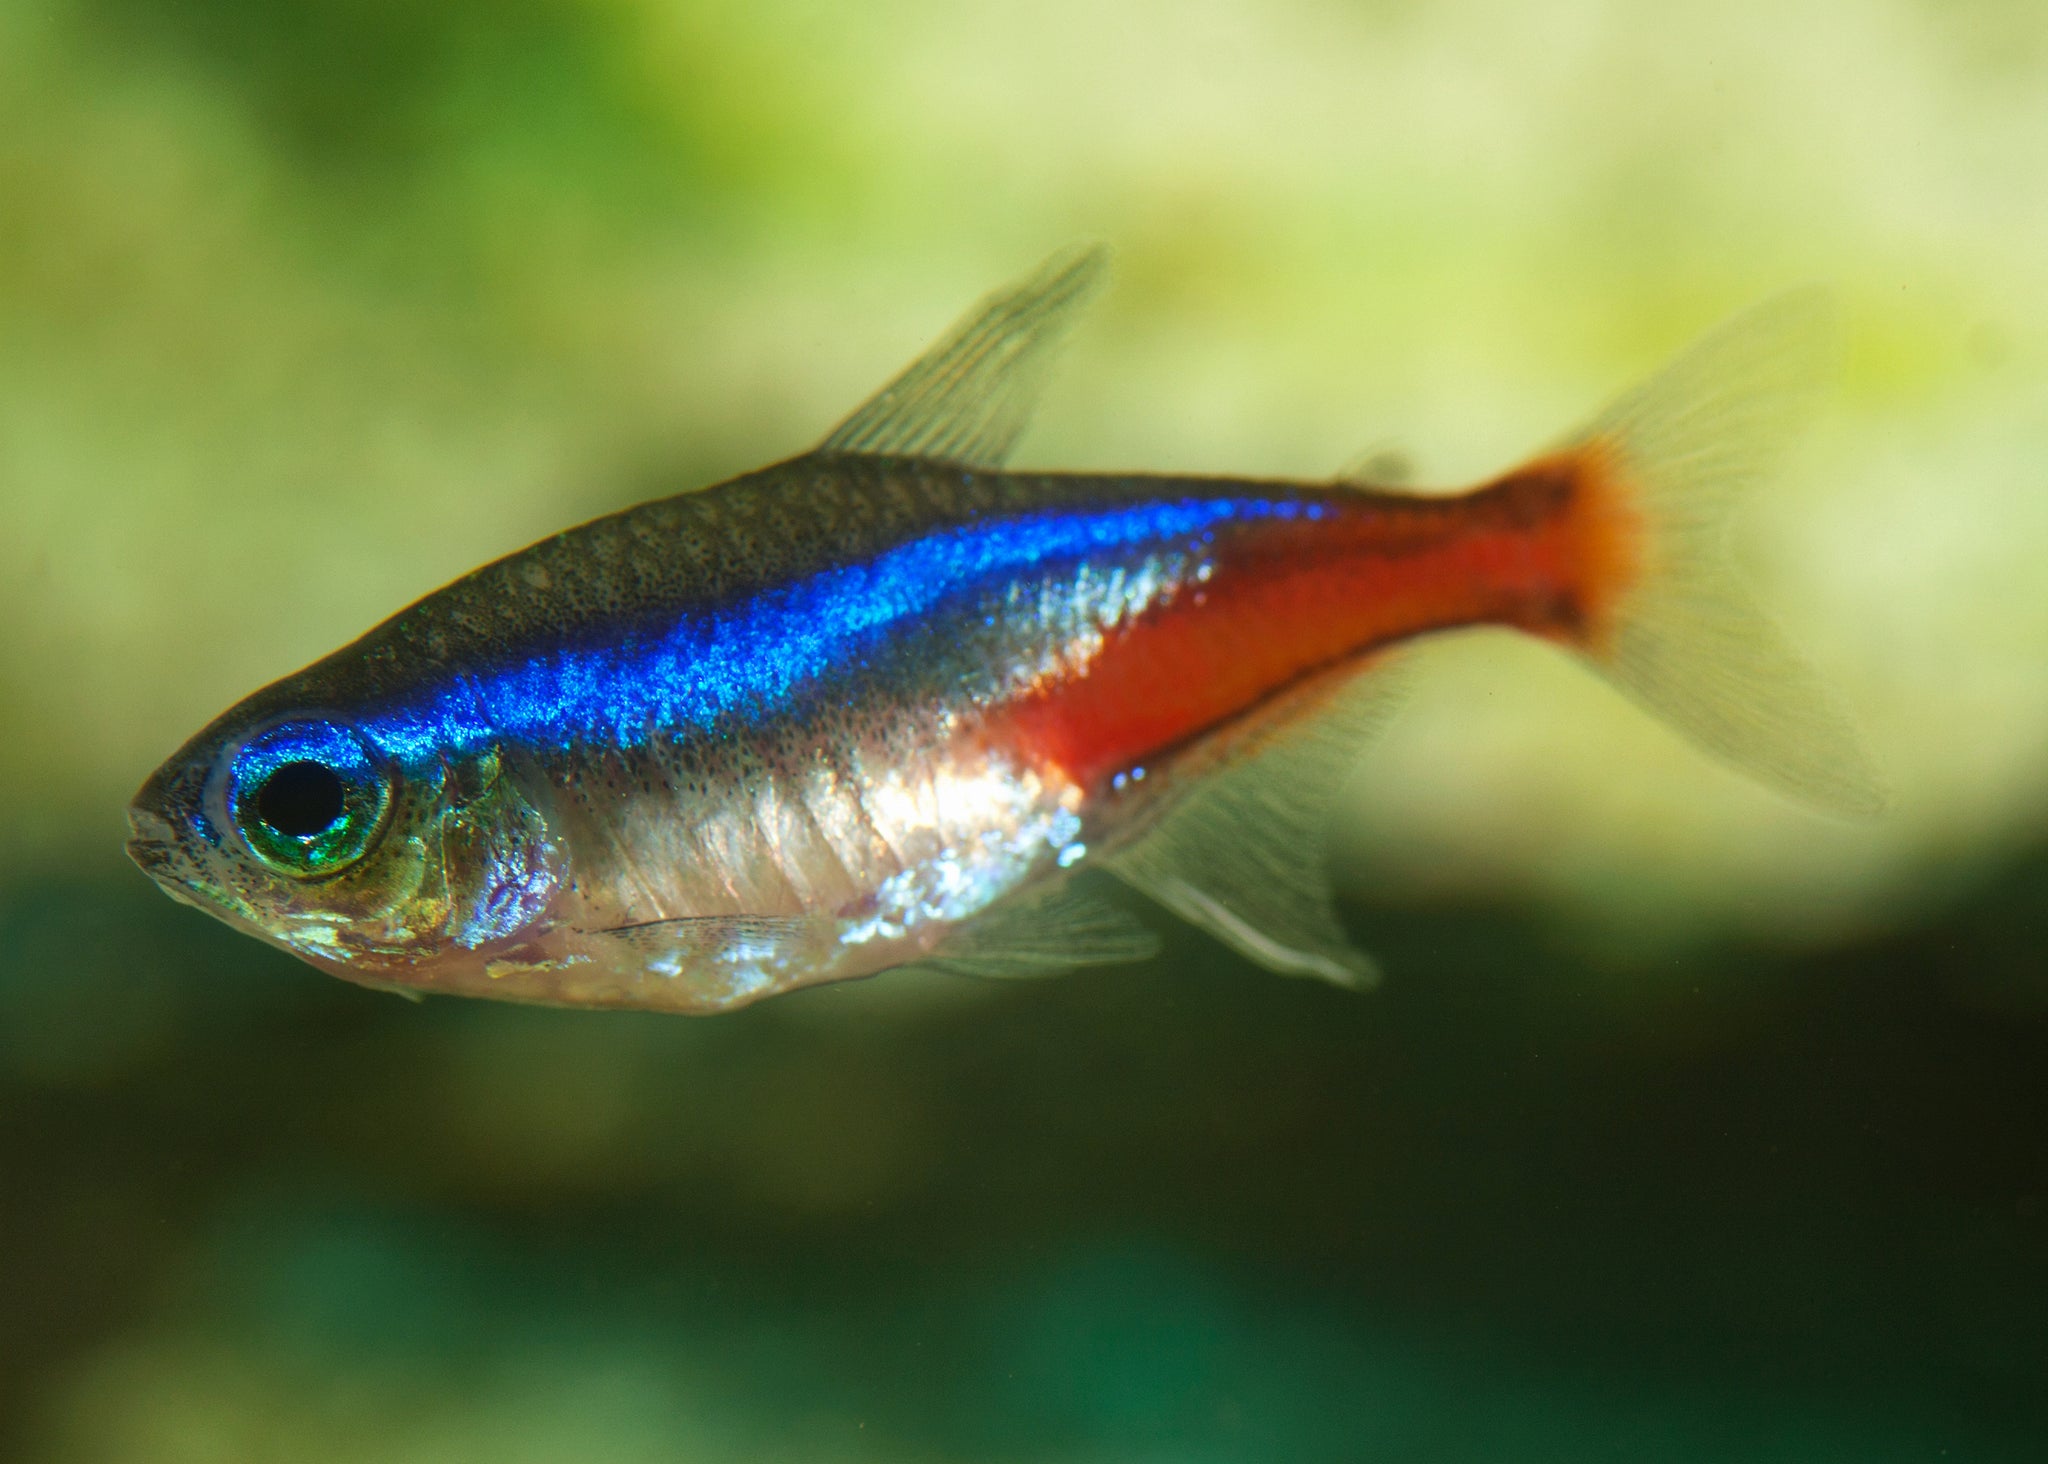 Neon Tetra: The Vibrant Choice for Your Aquarium, by Pet Pageant, Jan,  2024